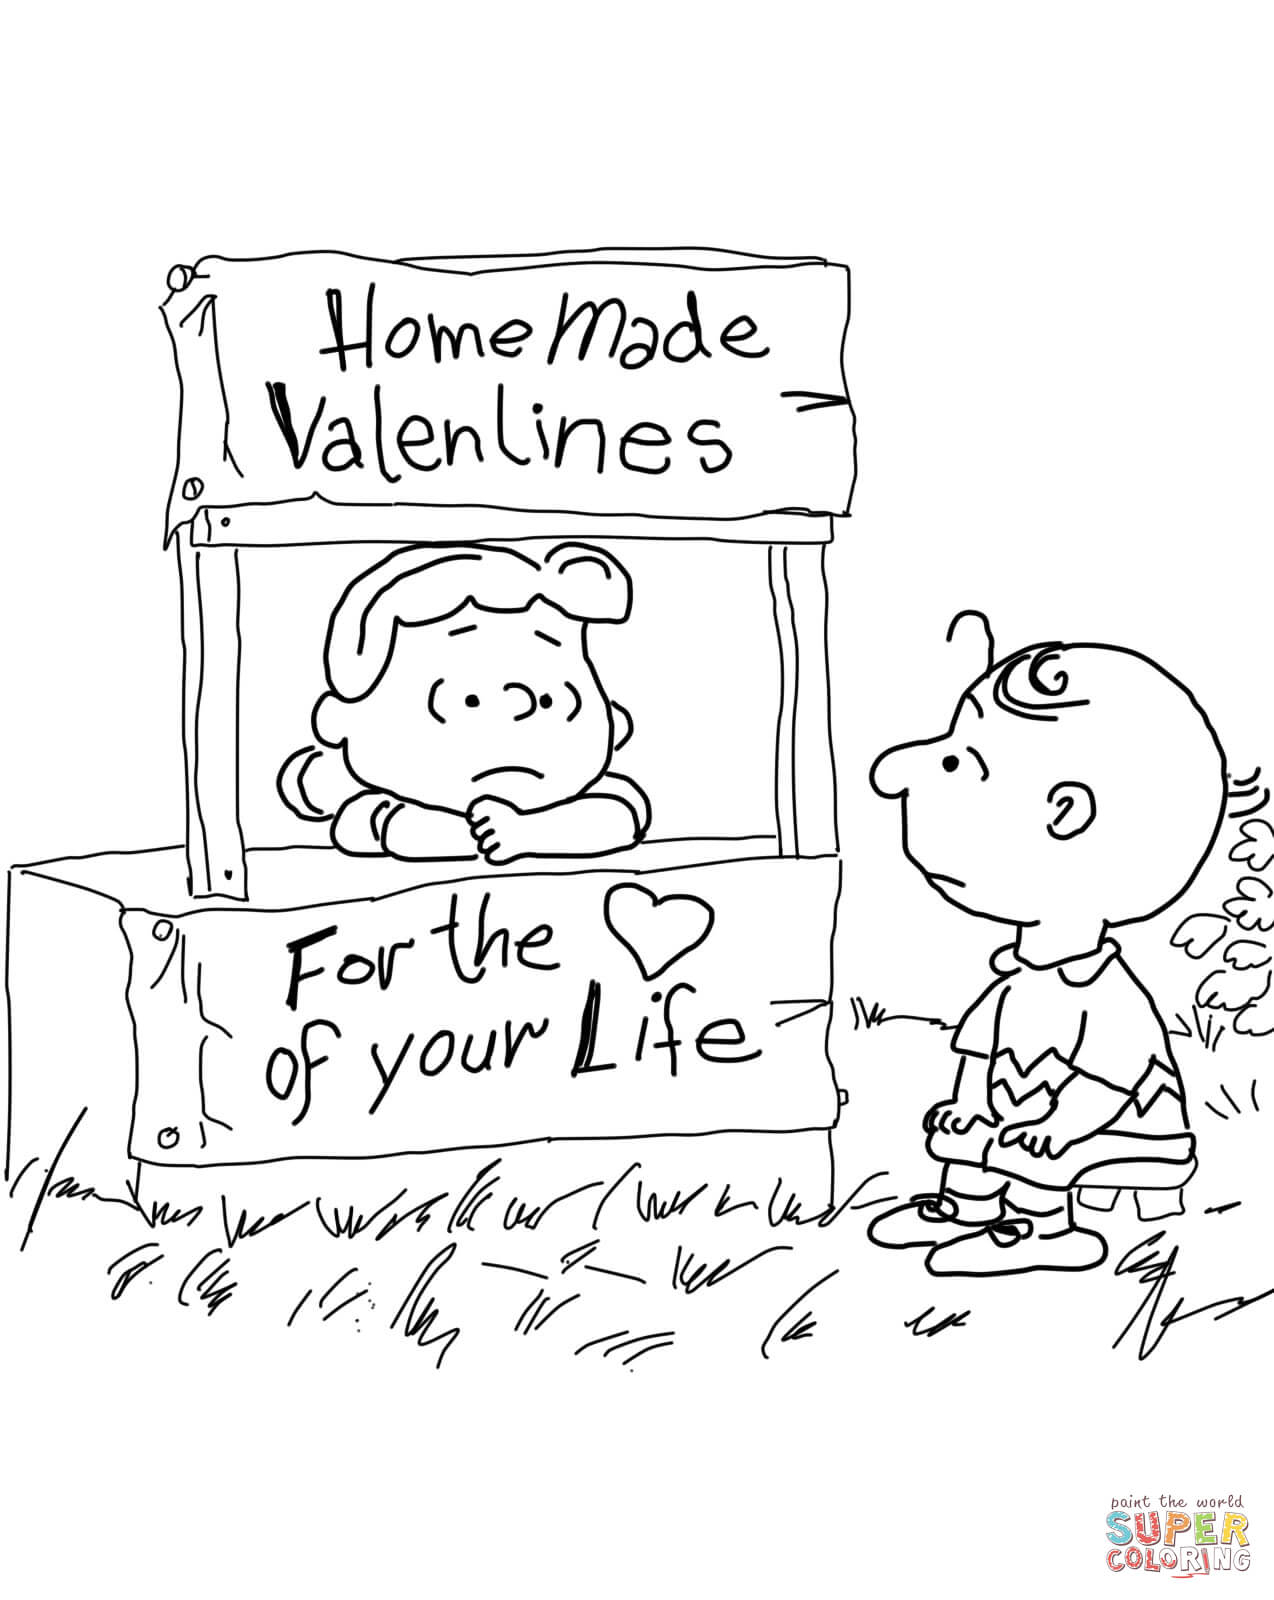 Valentines Day Coloring Page Peanuts Valentines Day Coloring Page Free Printable Coloring Pages